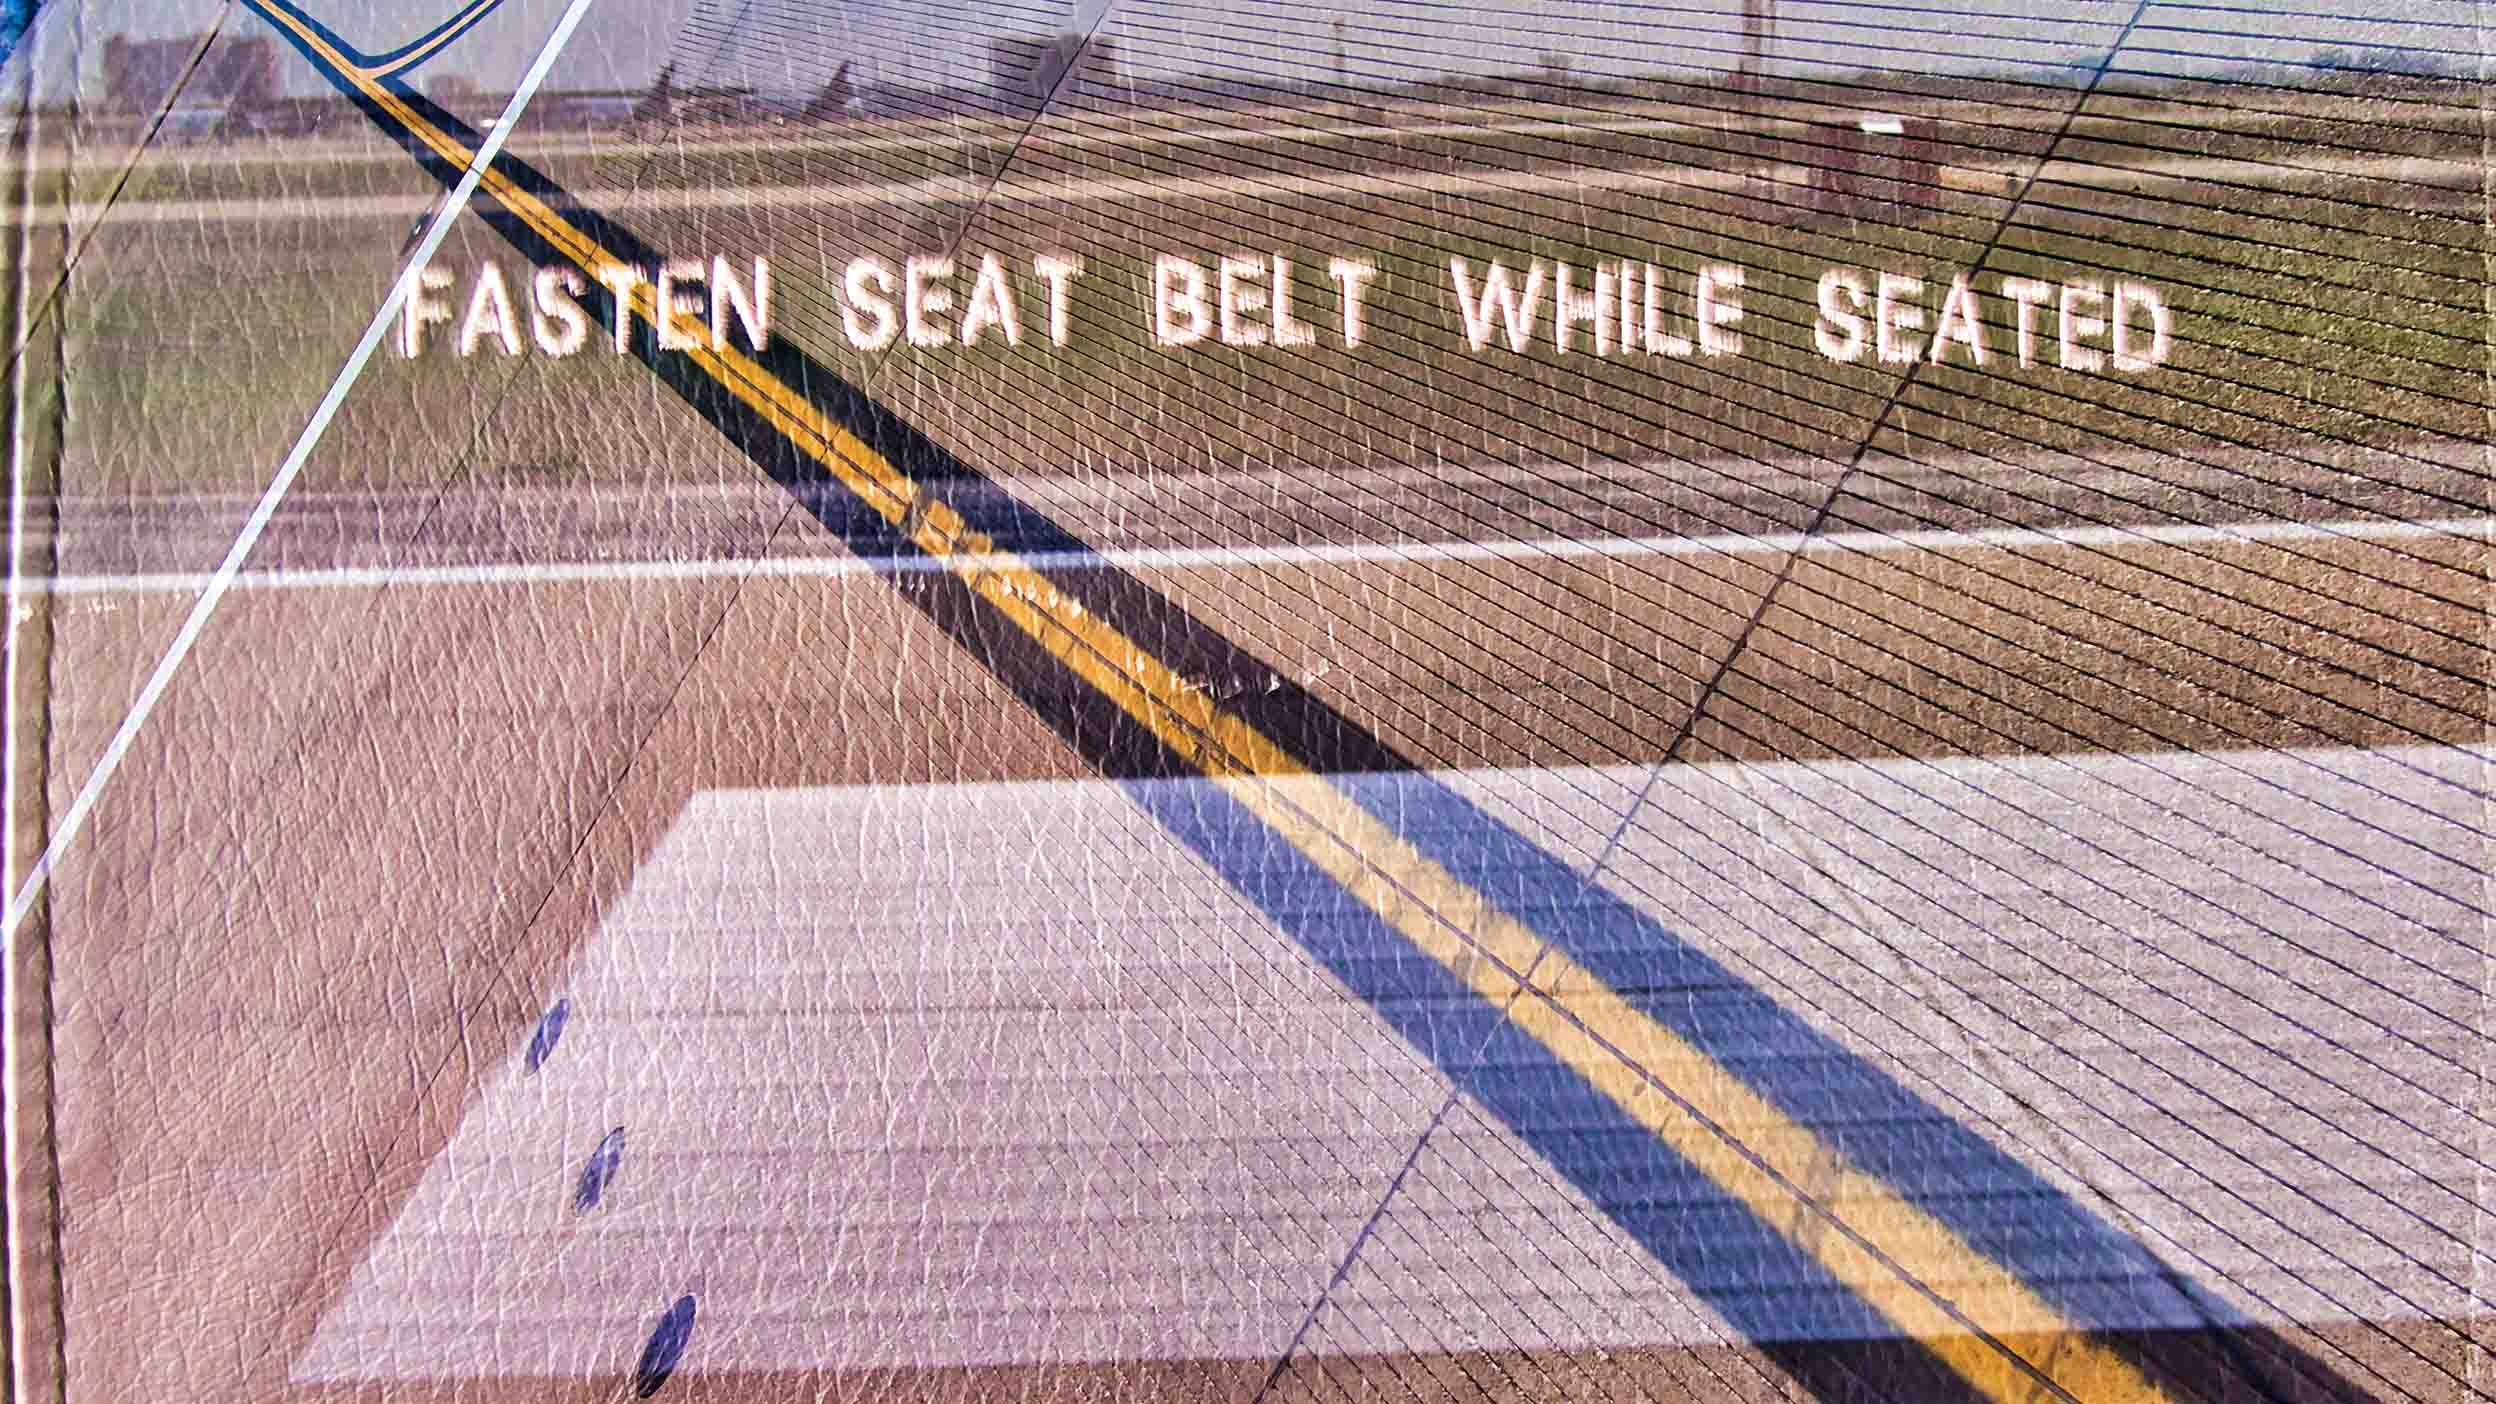 Fasten seat belt while seated message